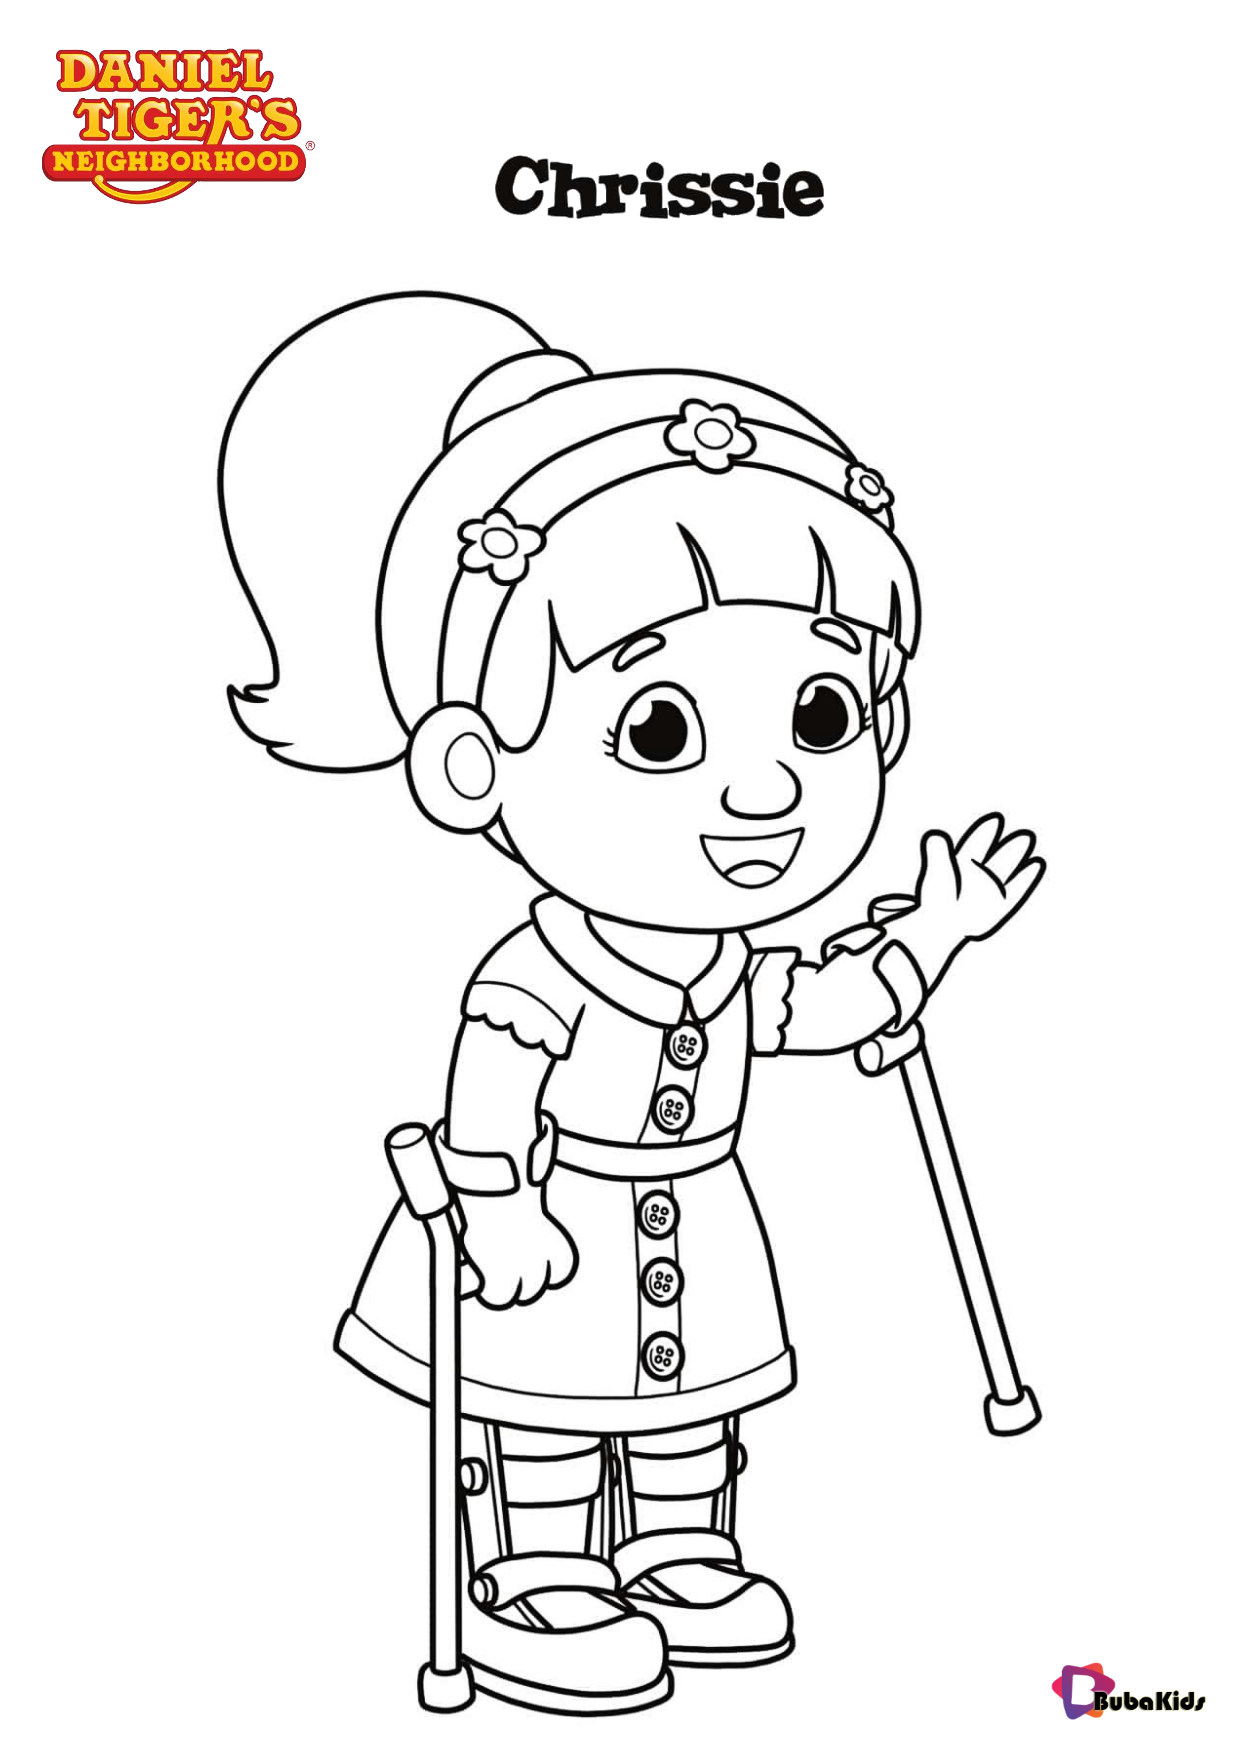 Chrissie coloring page Daniel Tigers Neighborhood tv serials coloring pages Wallpaper